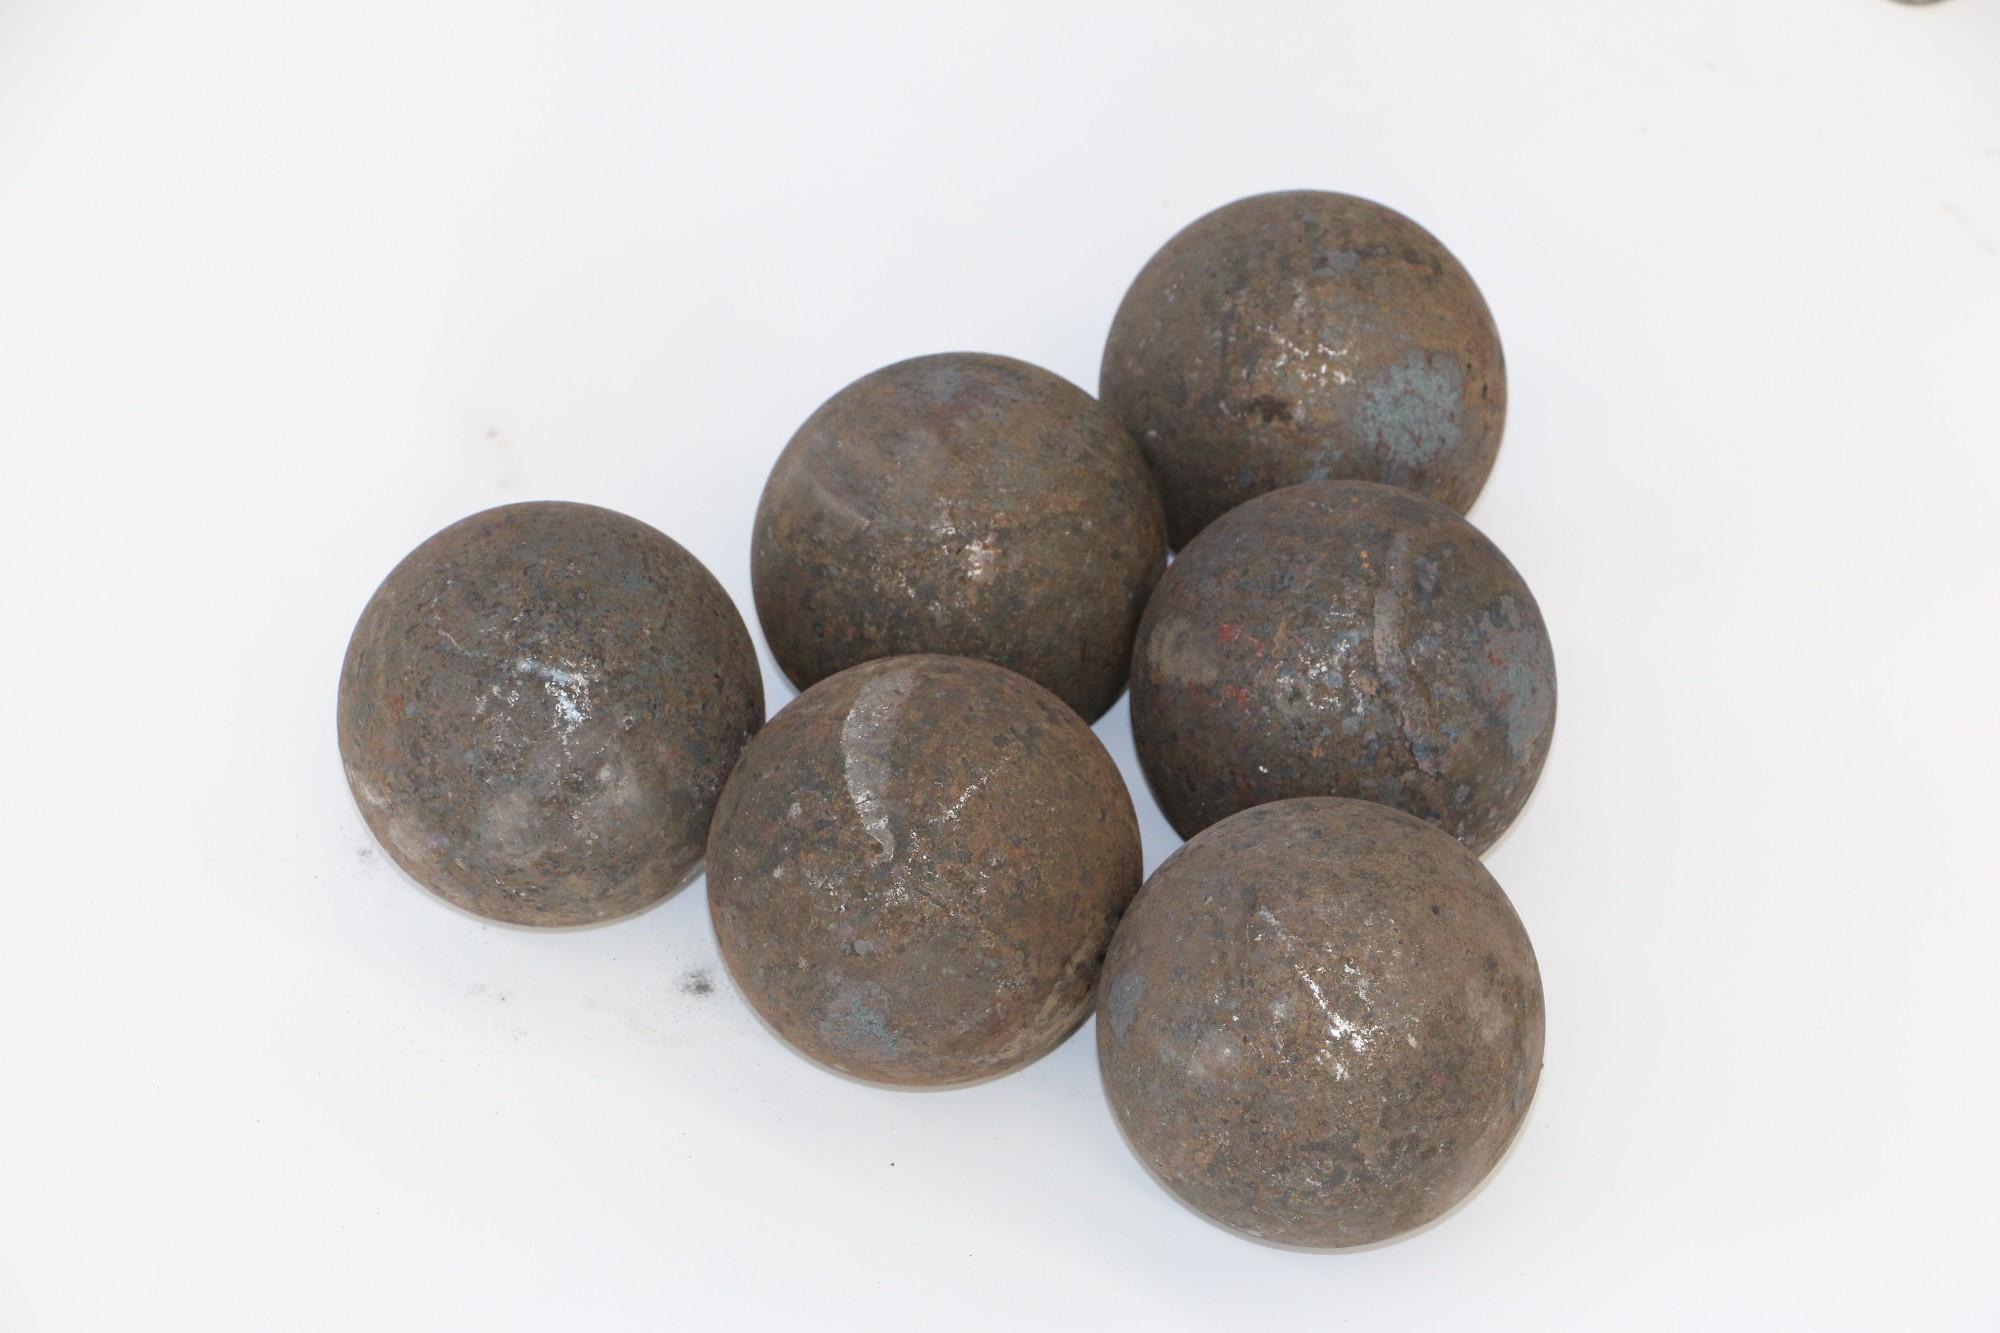 SGS Verified Forged SAG Mill Grinding Balls For Power Station And Mining Manufacturers, SGS Verified Forged SAG Mill Grinding Balls For Power Station And Mining Factory, Supply SGS Verified Forged SAG Mill Grinding Balls For Power Station And Mining